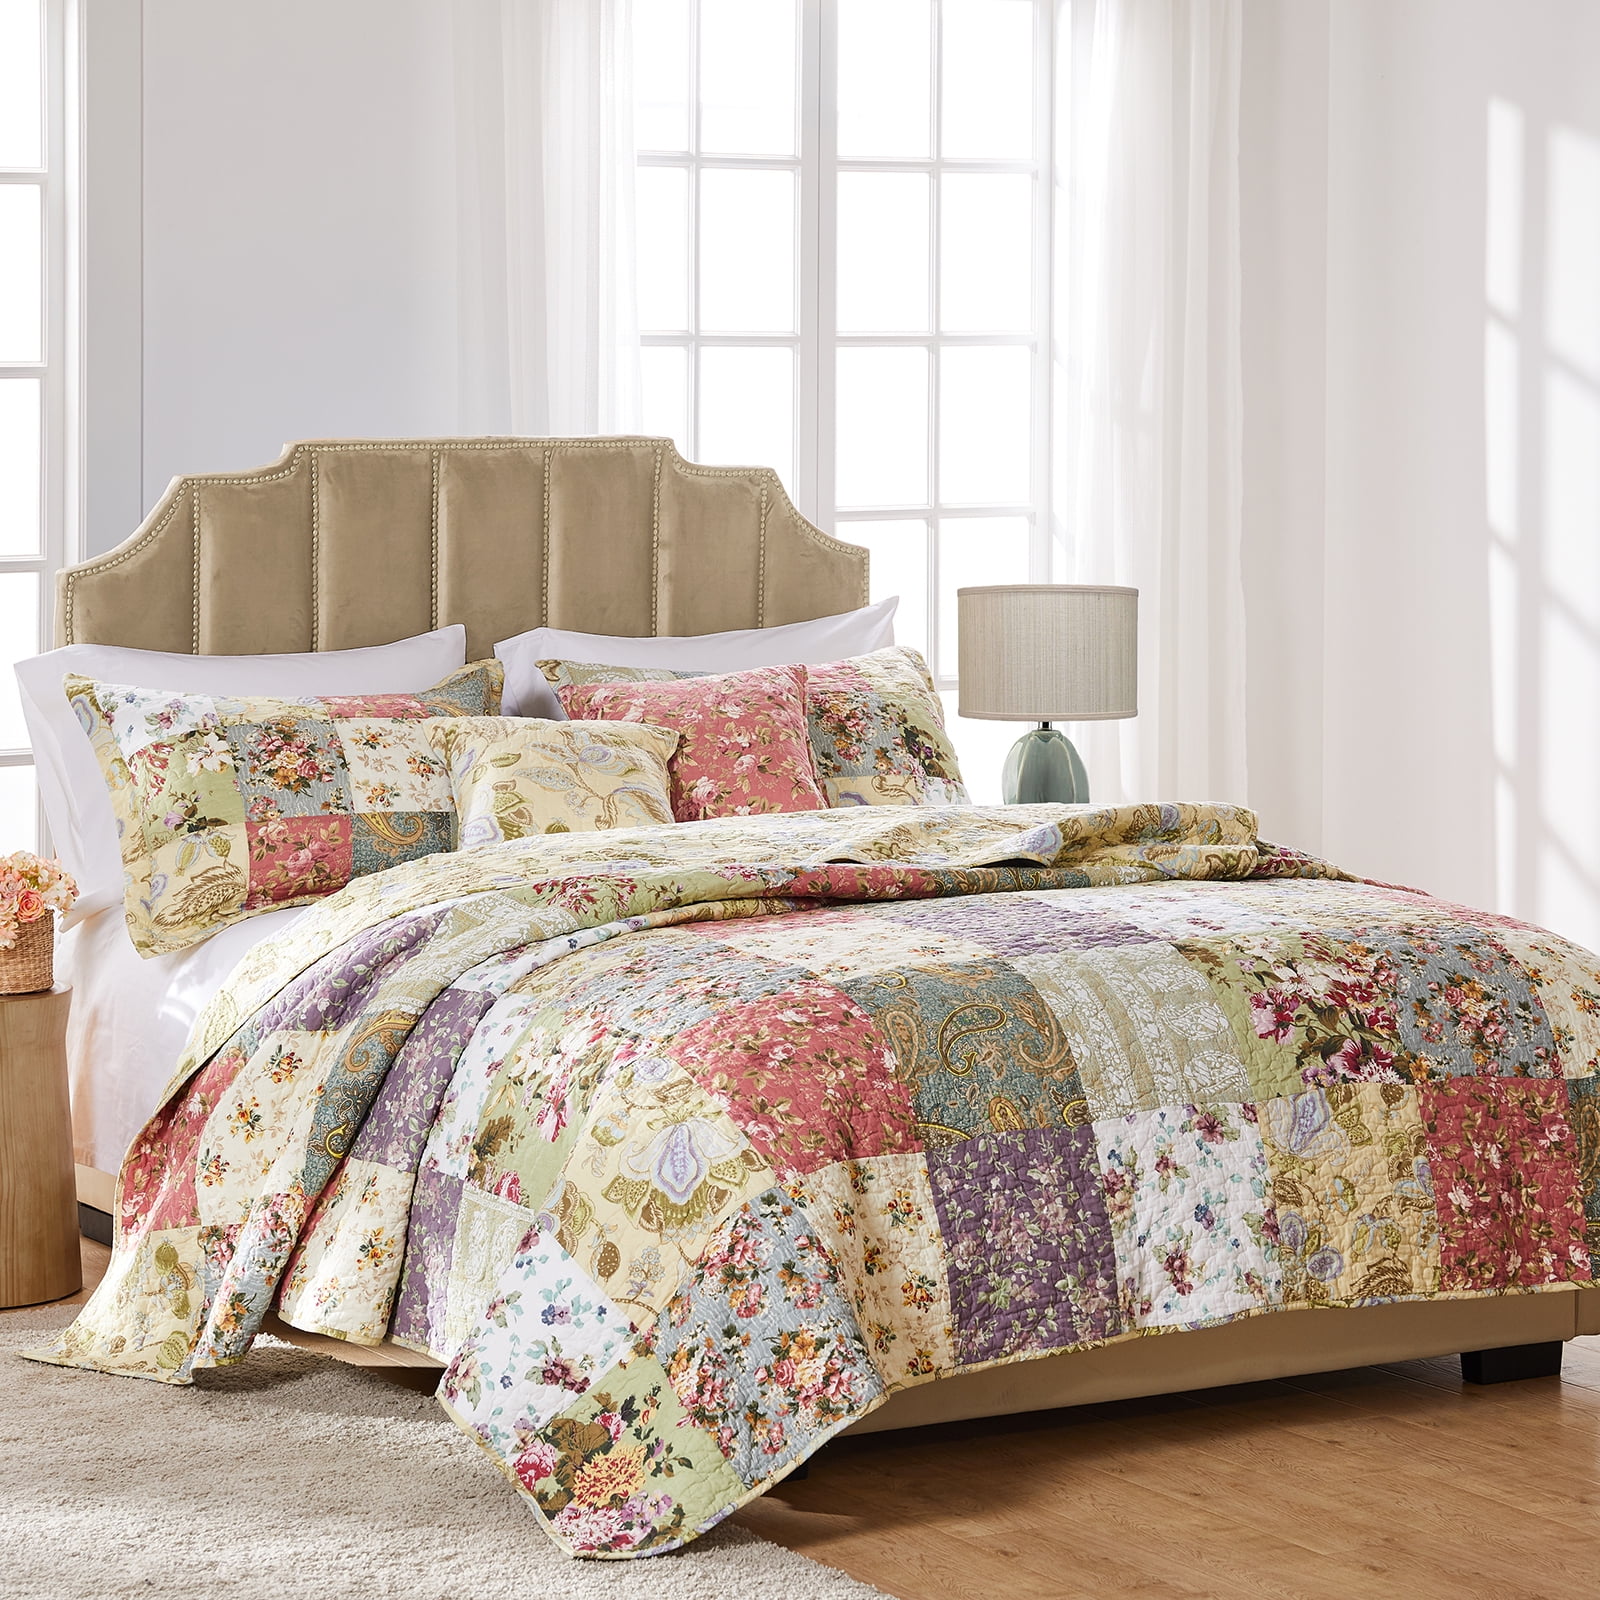 Details about   Greenland Home Blooming Prairie Cotton Patchwork Quilt Set 3-Piece King/Cal Kin 